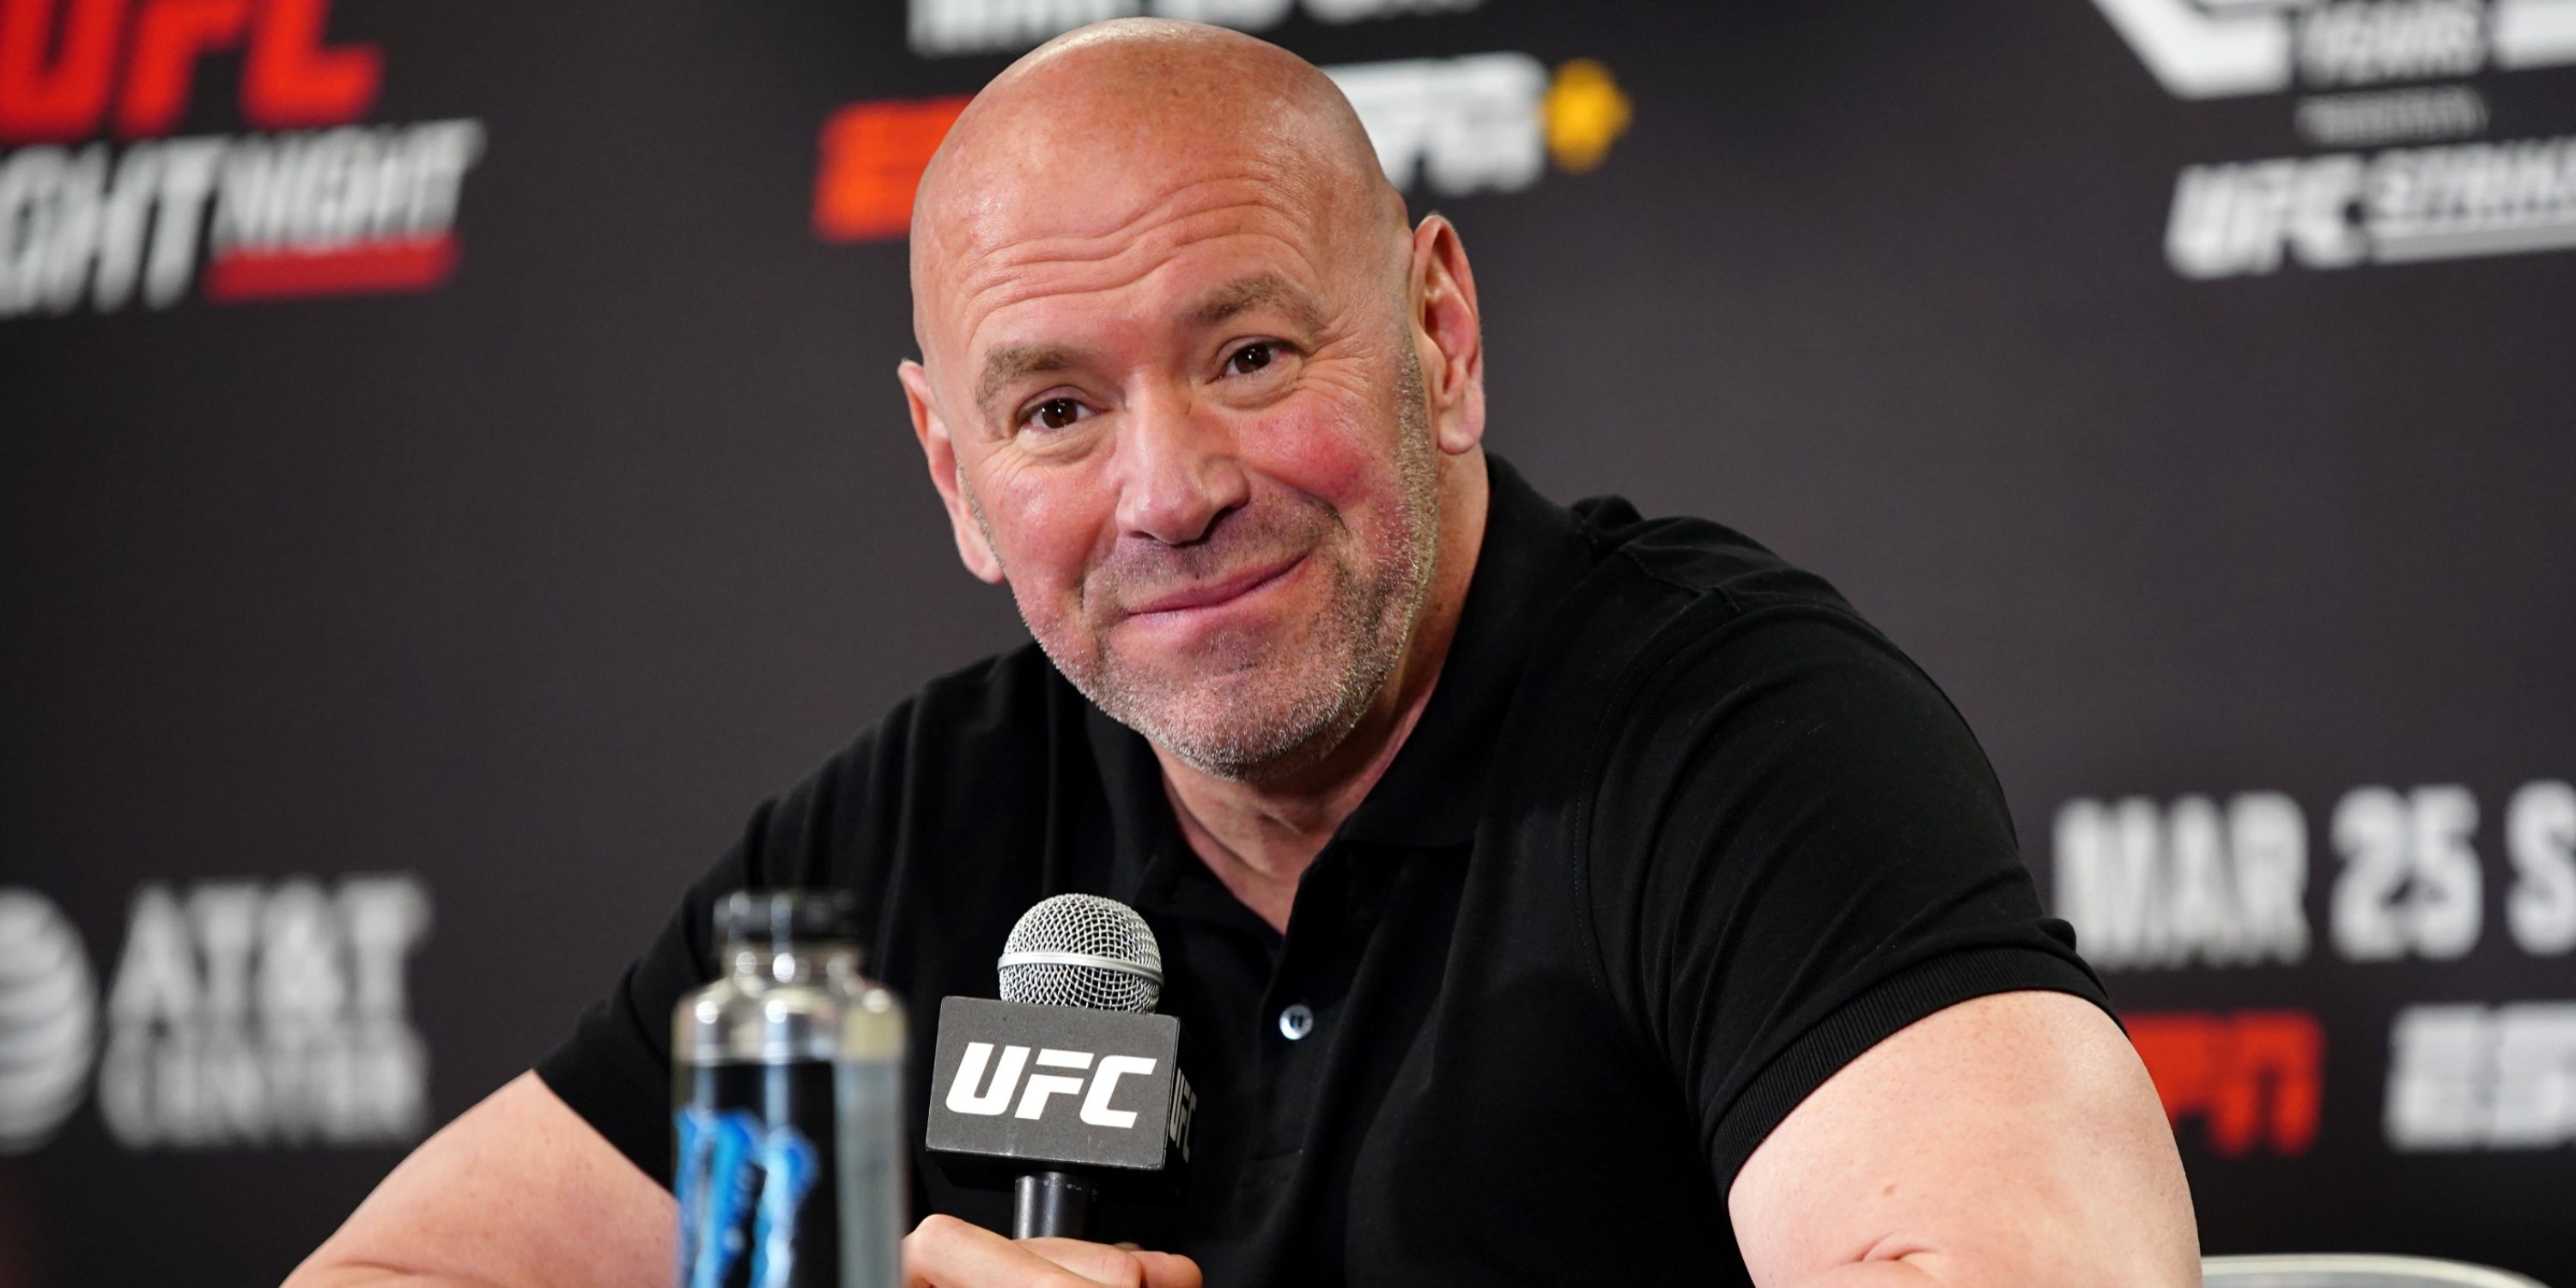 Dana White during a UFC press conference